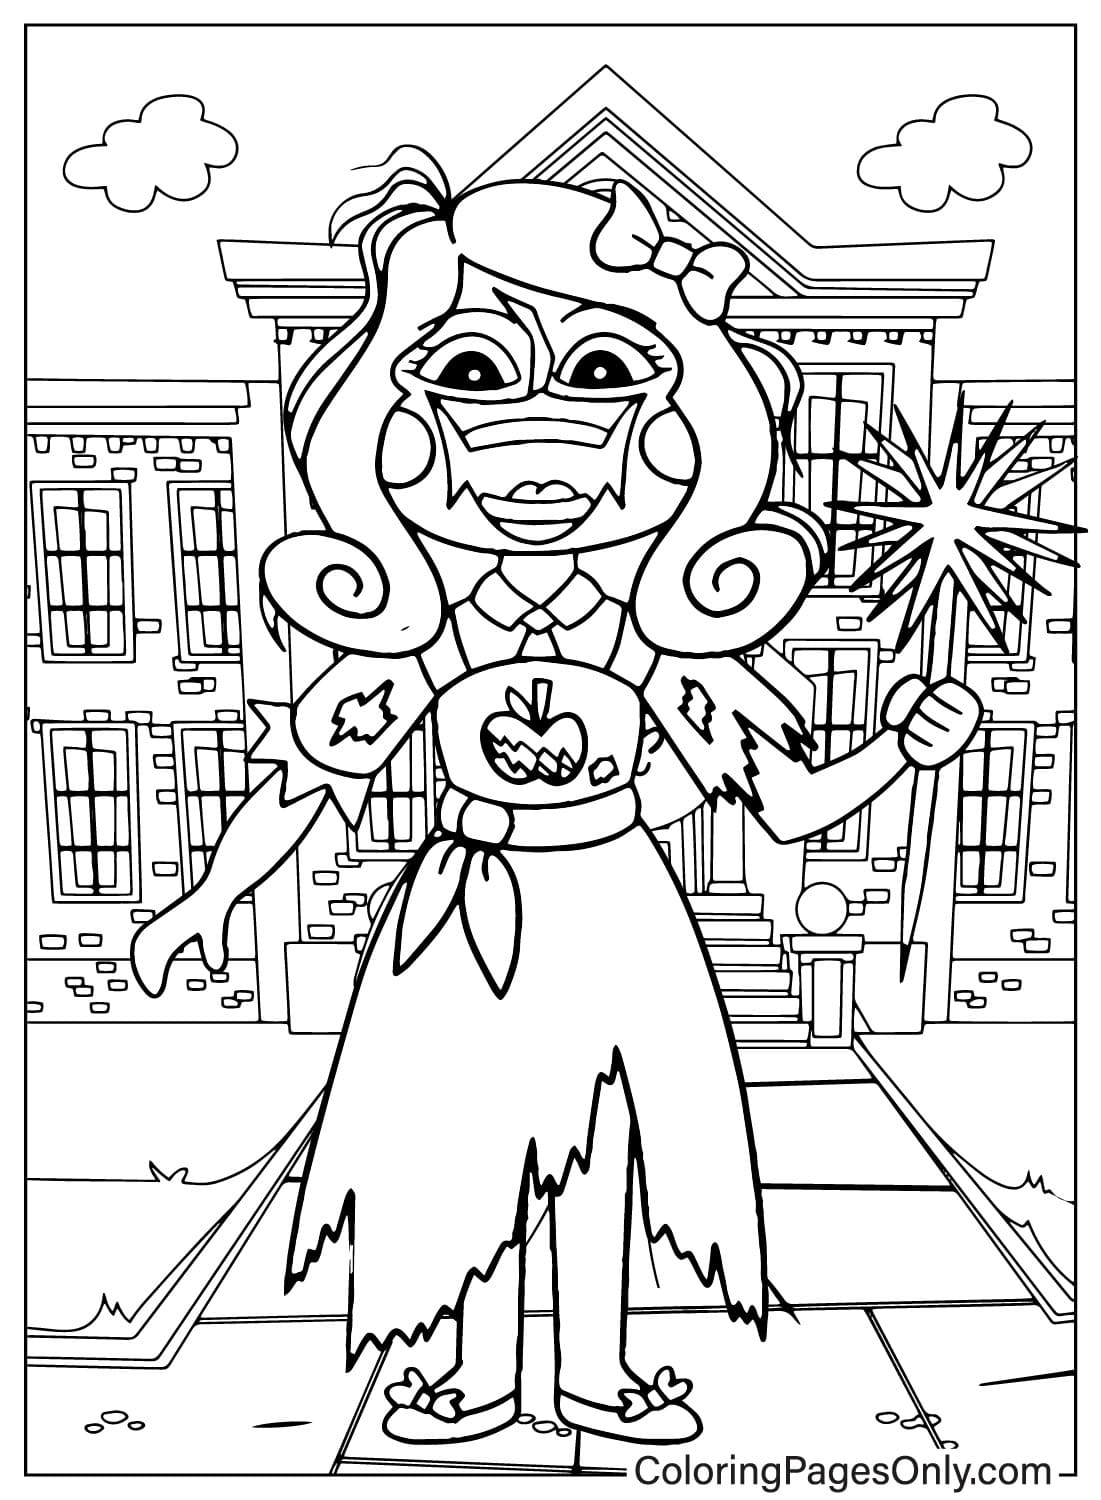 Images Miss Delight Coloring Page from Miss Delight